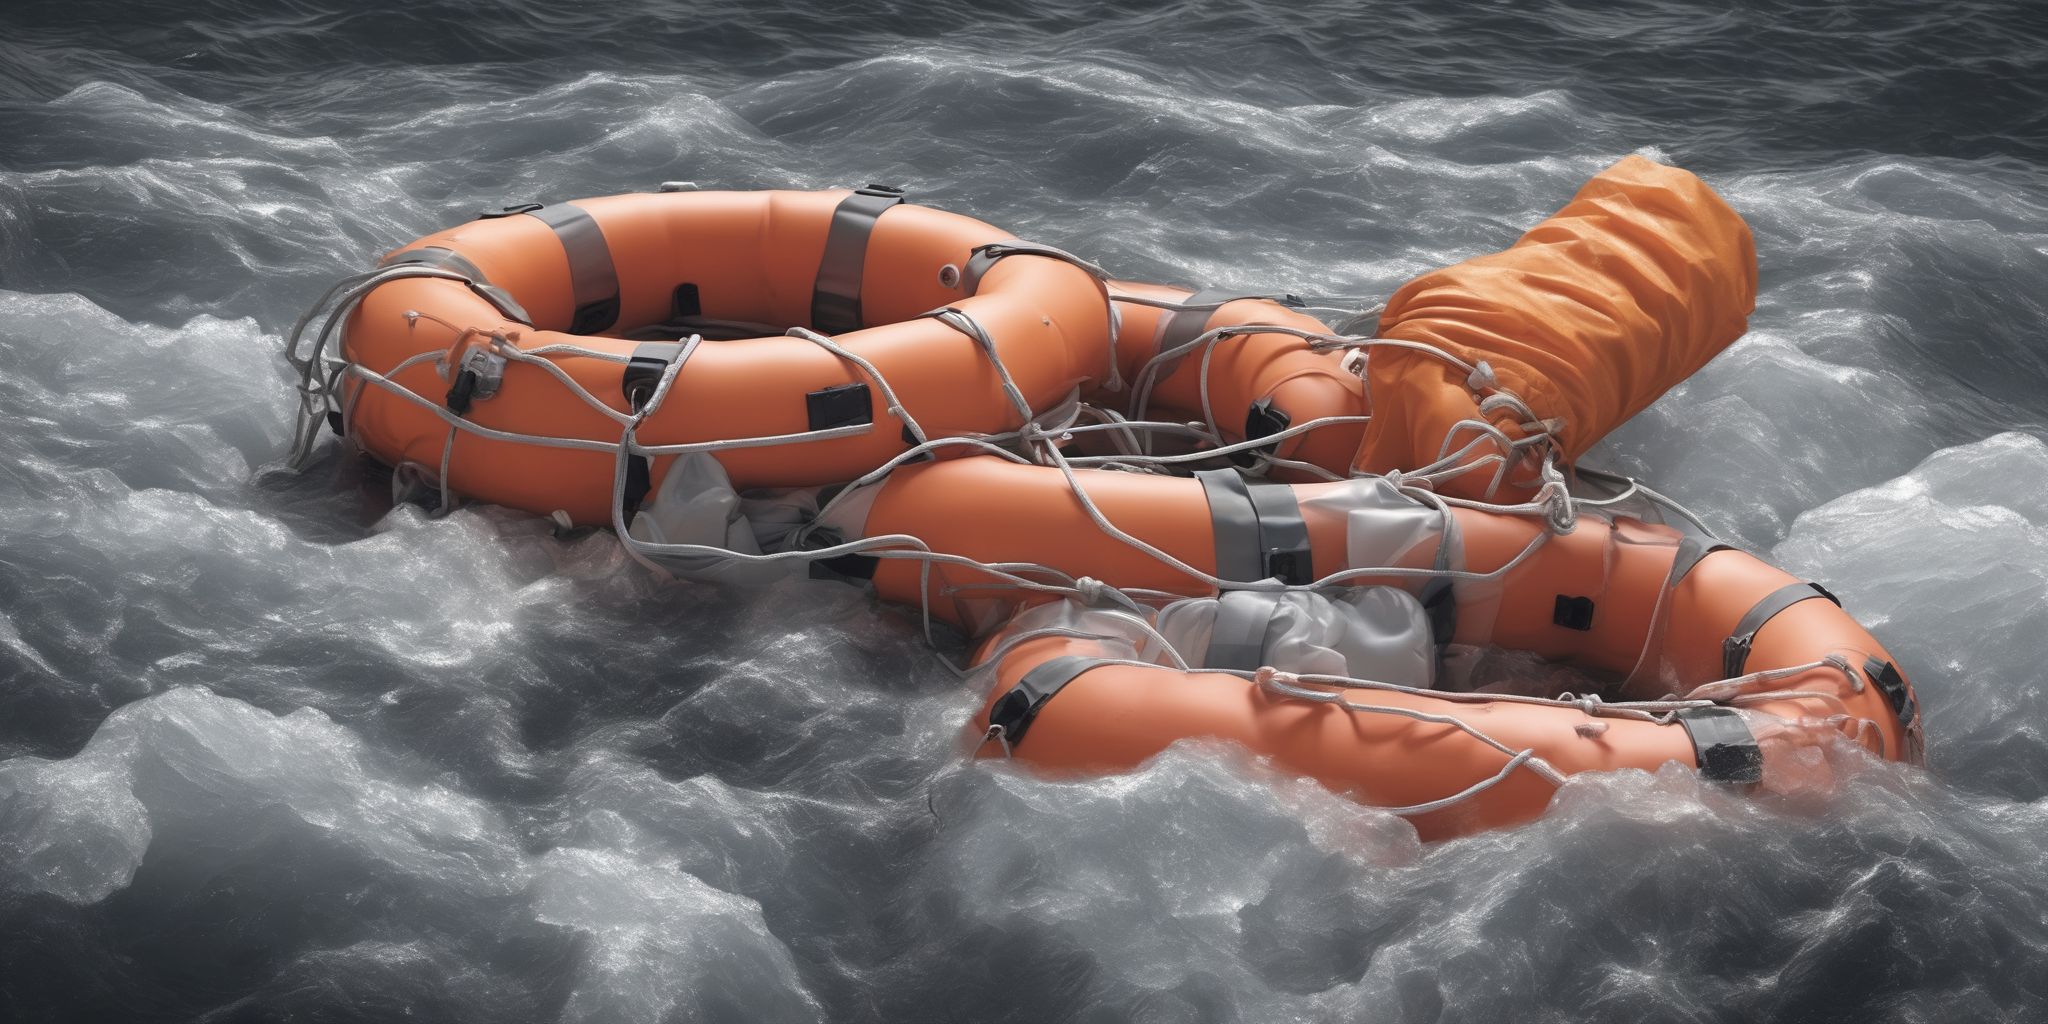 Life raft  in realistic, photographic style